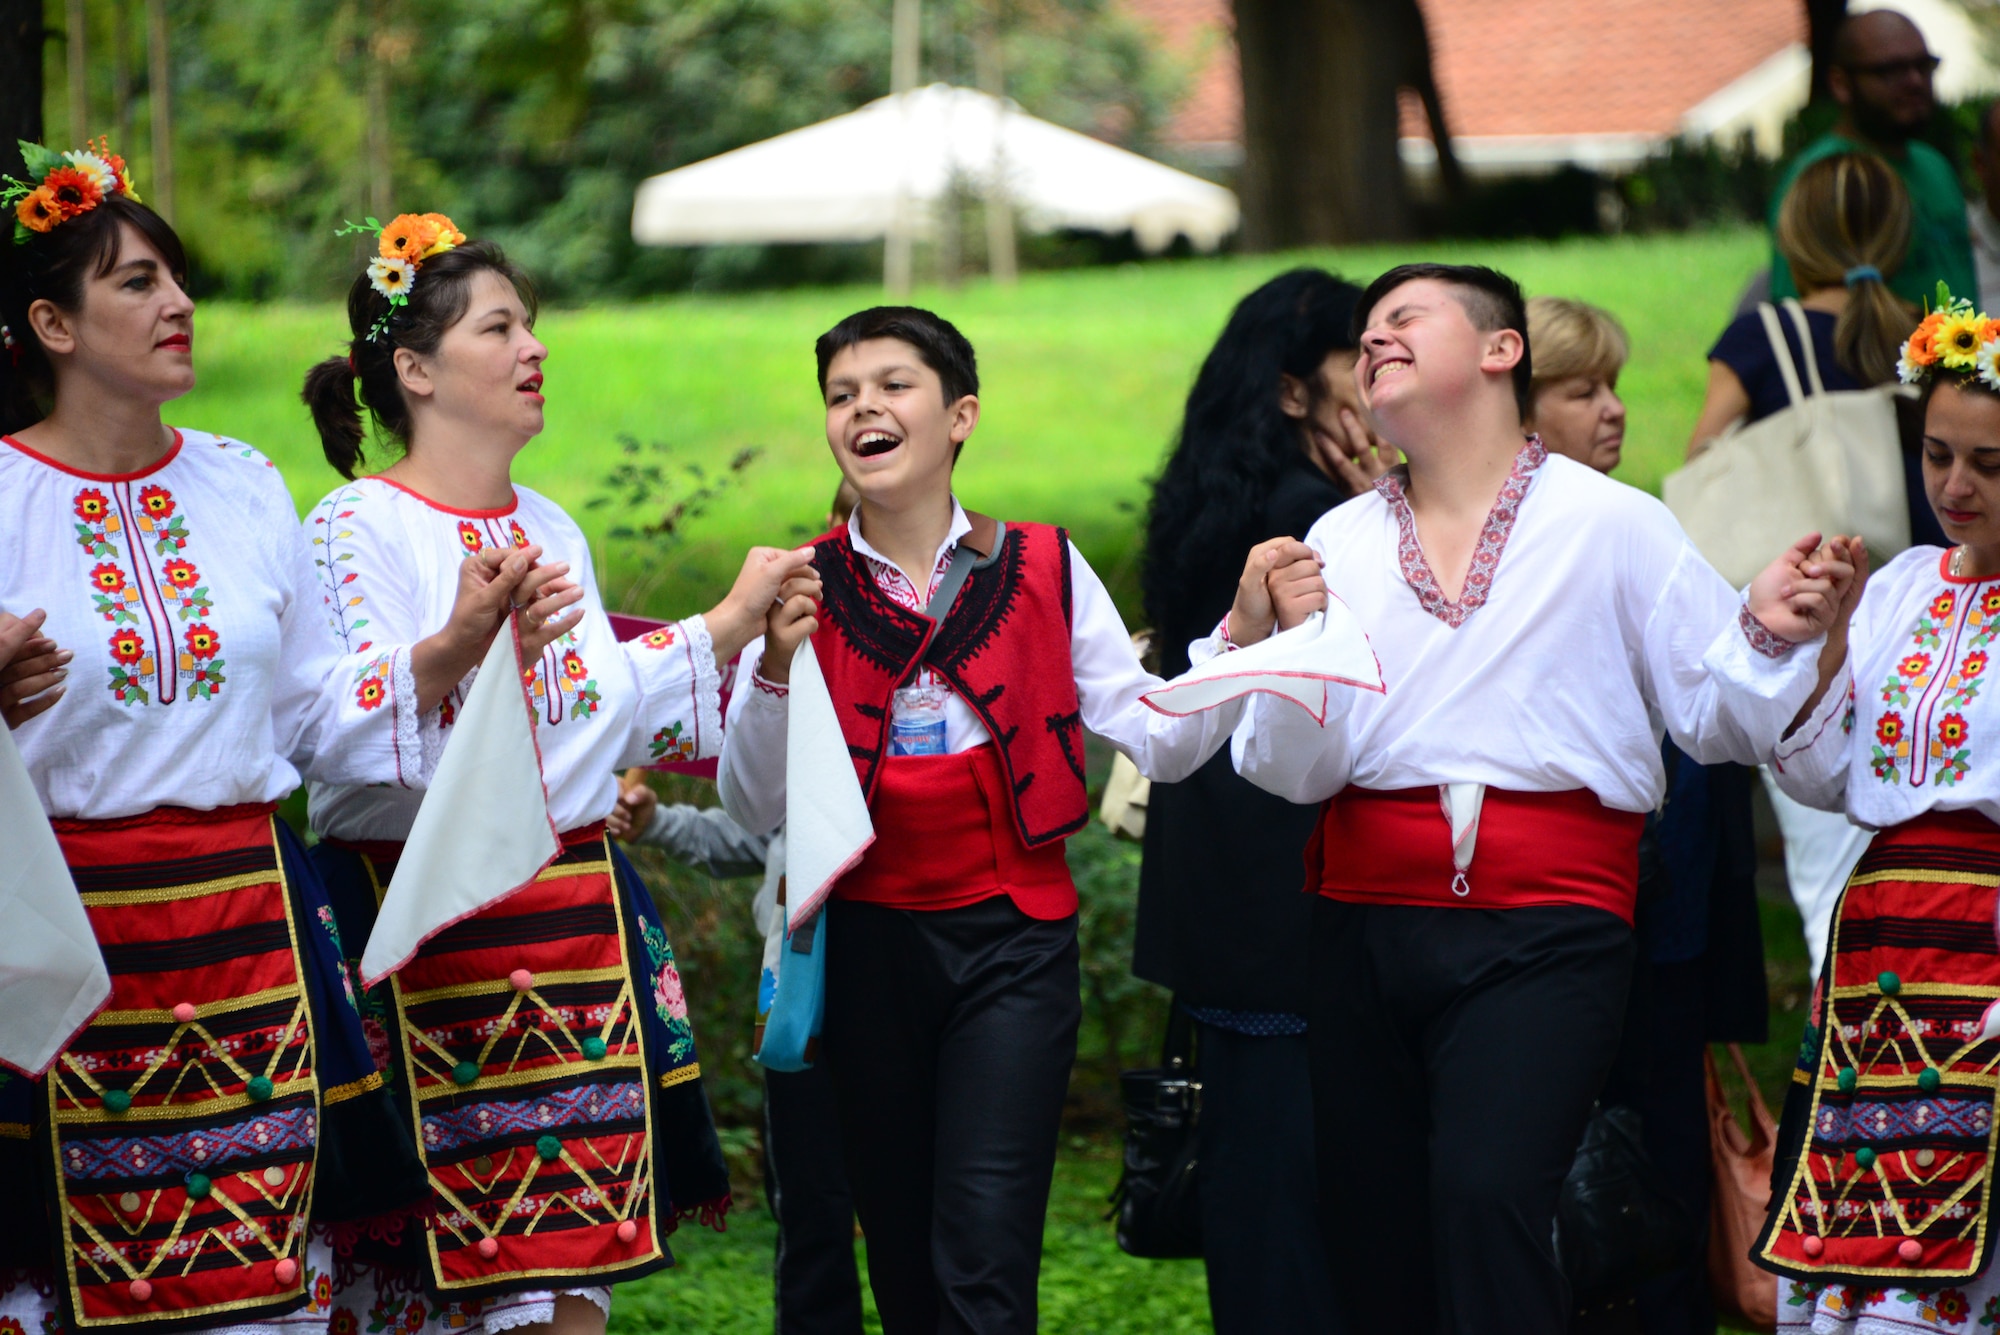 Locals dressed in traditional attire dance and sing in a city park in Plovdiv, Bulgaria.  Tennessee National Guard Soldiers and Airmen enjoyed a Morale Wellness and Recreation visit to Plovdiv on Aug.13, 2016 while they were deployed to Novo Selo Training Area, Bulgaria to participate in Humanitarian Civic Assistance projects.    (U.S. Air National Guard photo by Master Sgt. Kendra M. Owenby, 134 ARW Public Affairs)